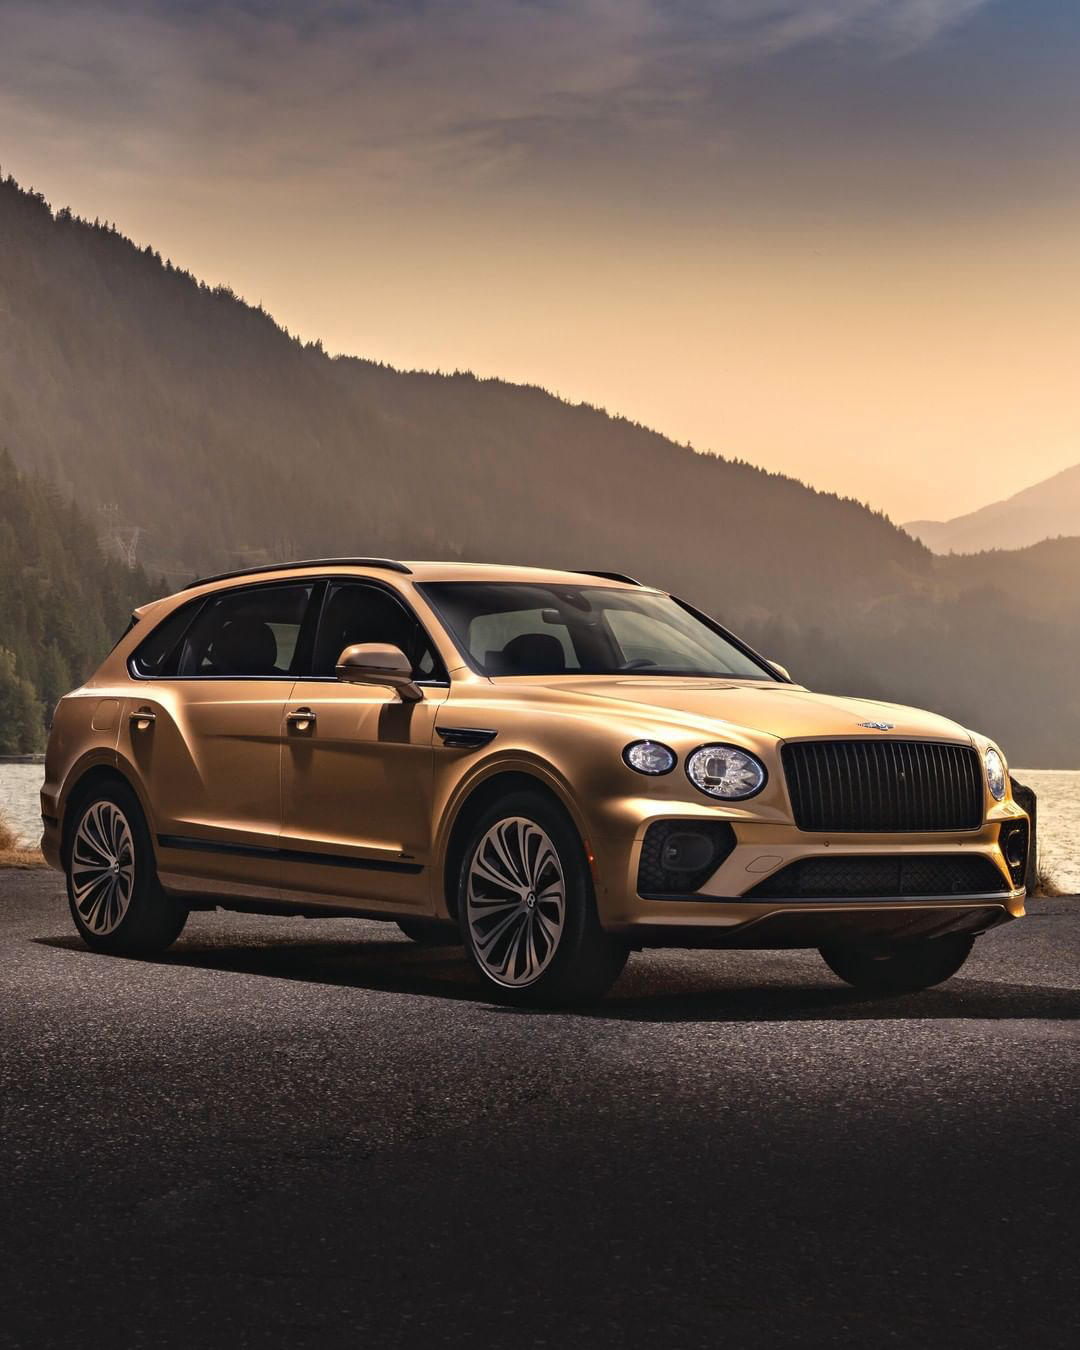 Bentley Motors - “The attention paid to the quality of the leather, the knurling on some of the swit